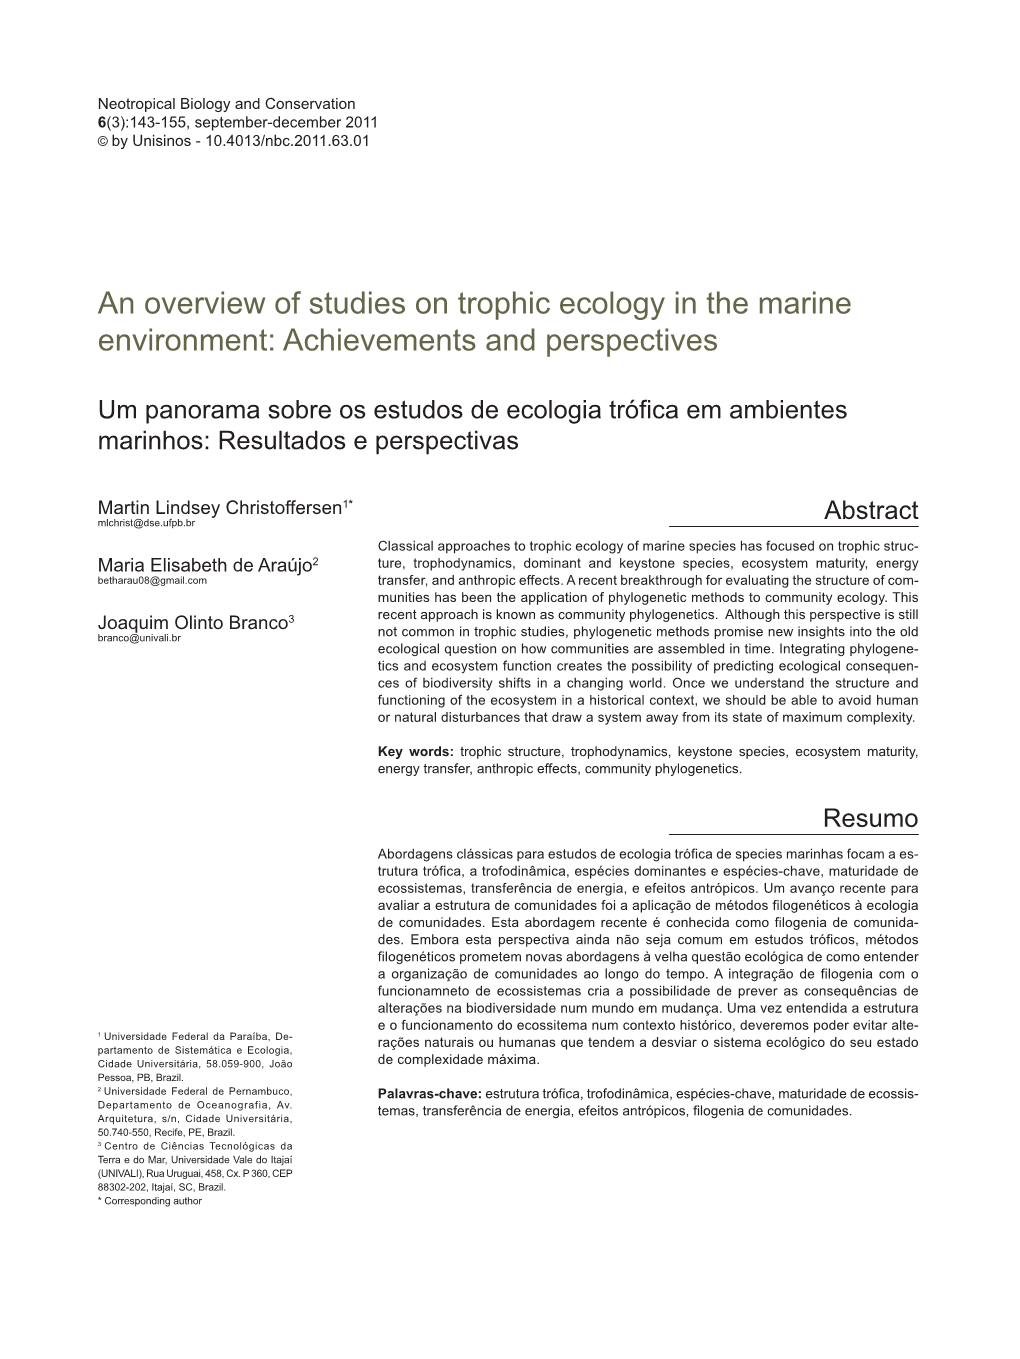 An Overview of Studies on Trophic Ecology in the Marine Environment: Achievements and Perspectives